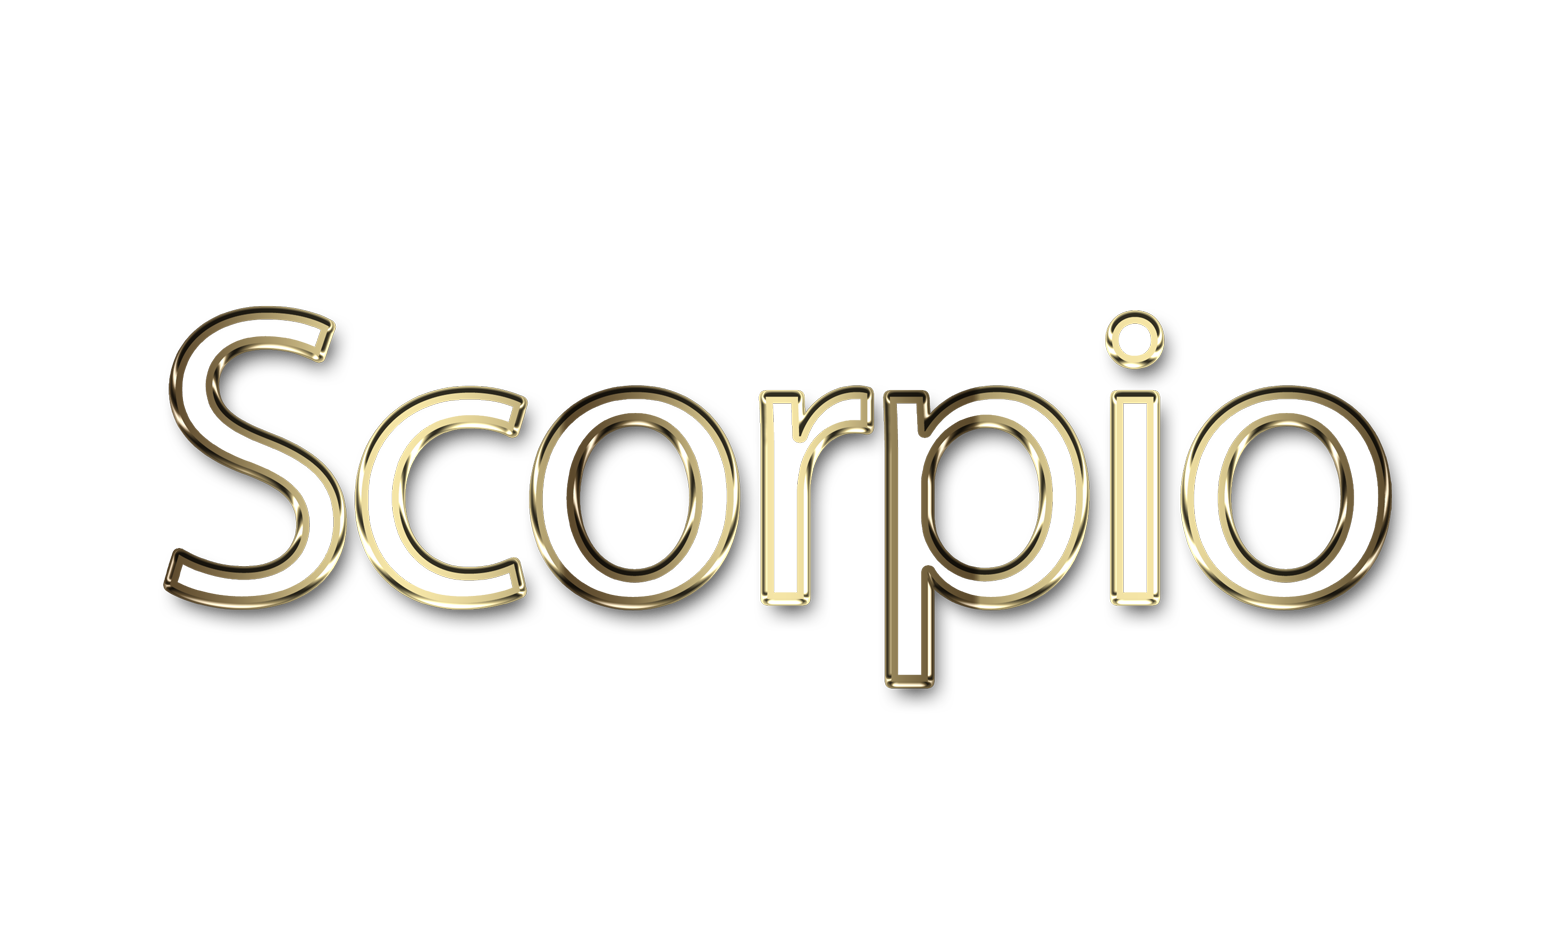 Scorpio png, word Scorpio png, Scorpio word png, Scorpio text png, Scorpio letters png, Scorpio word art typography PNG images, transparent png